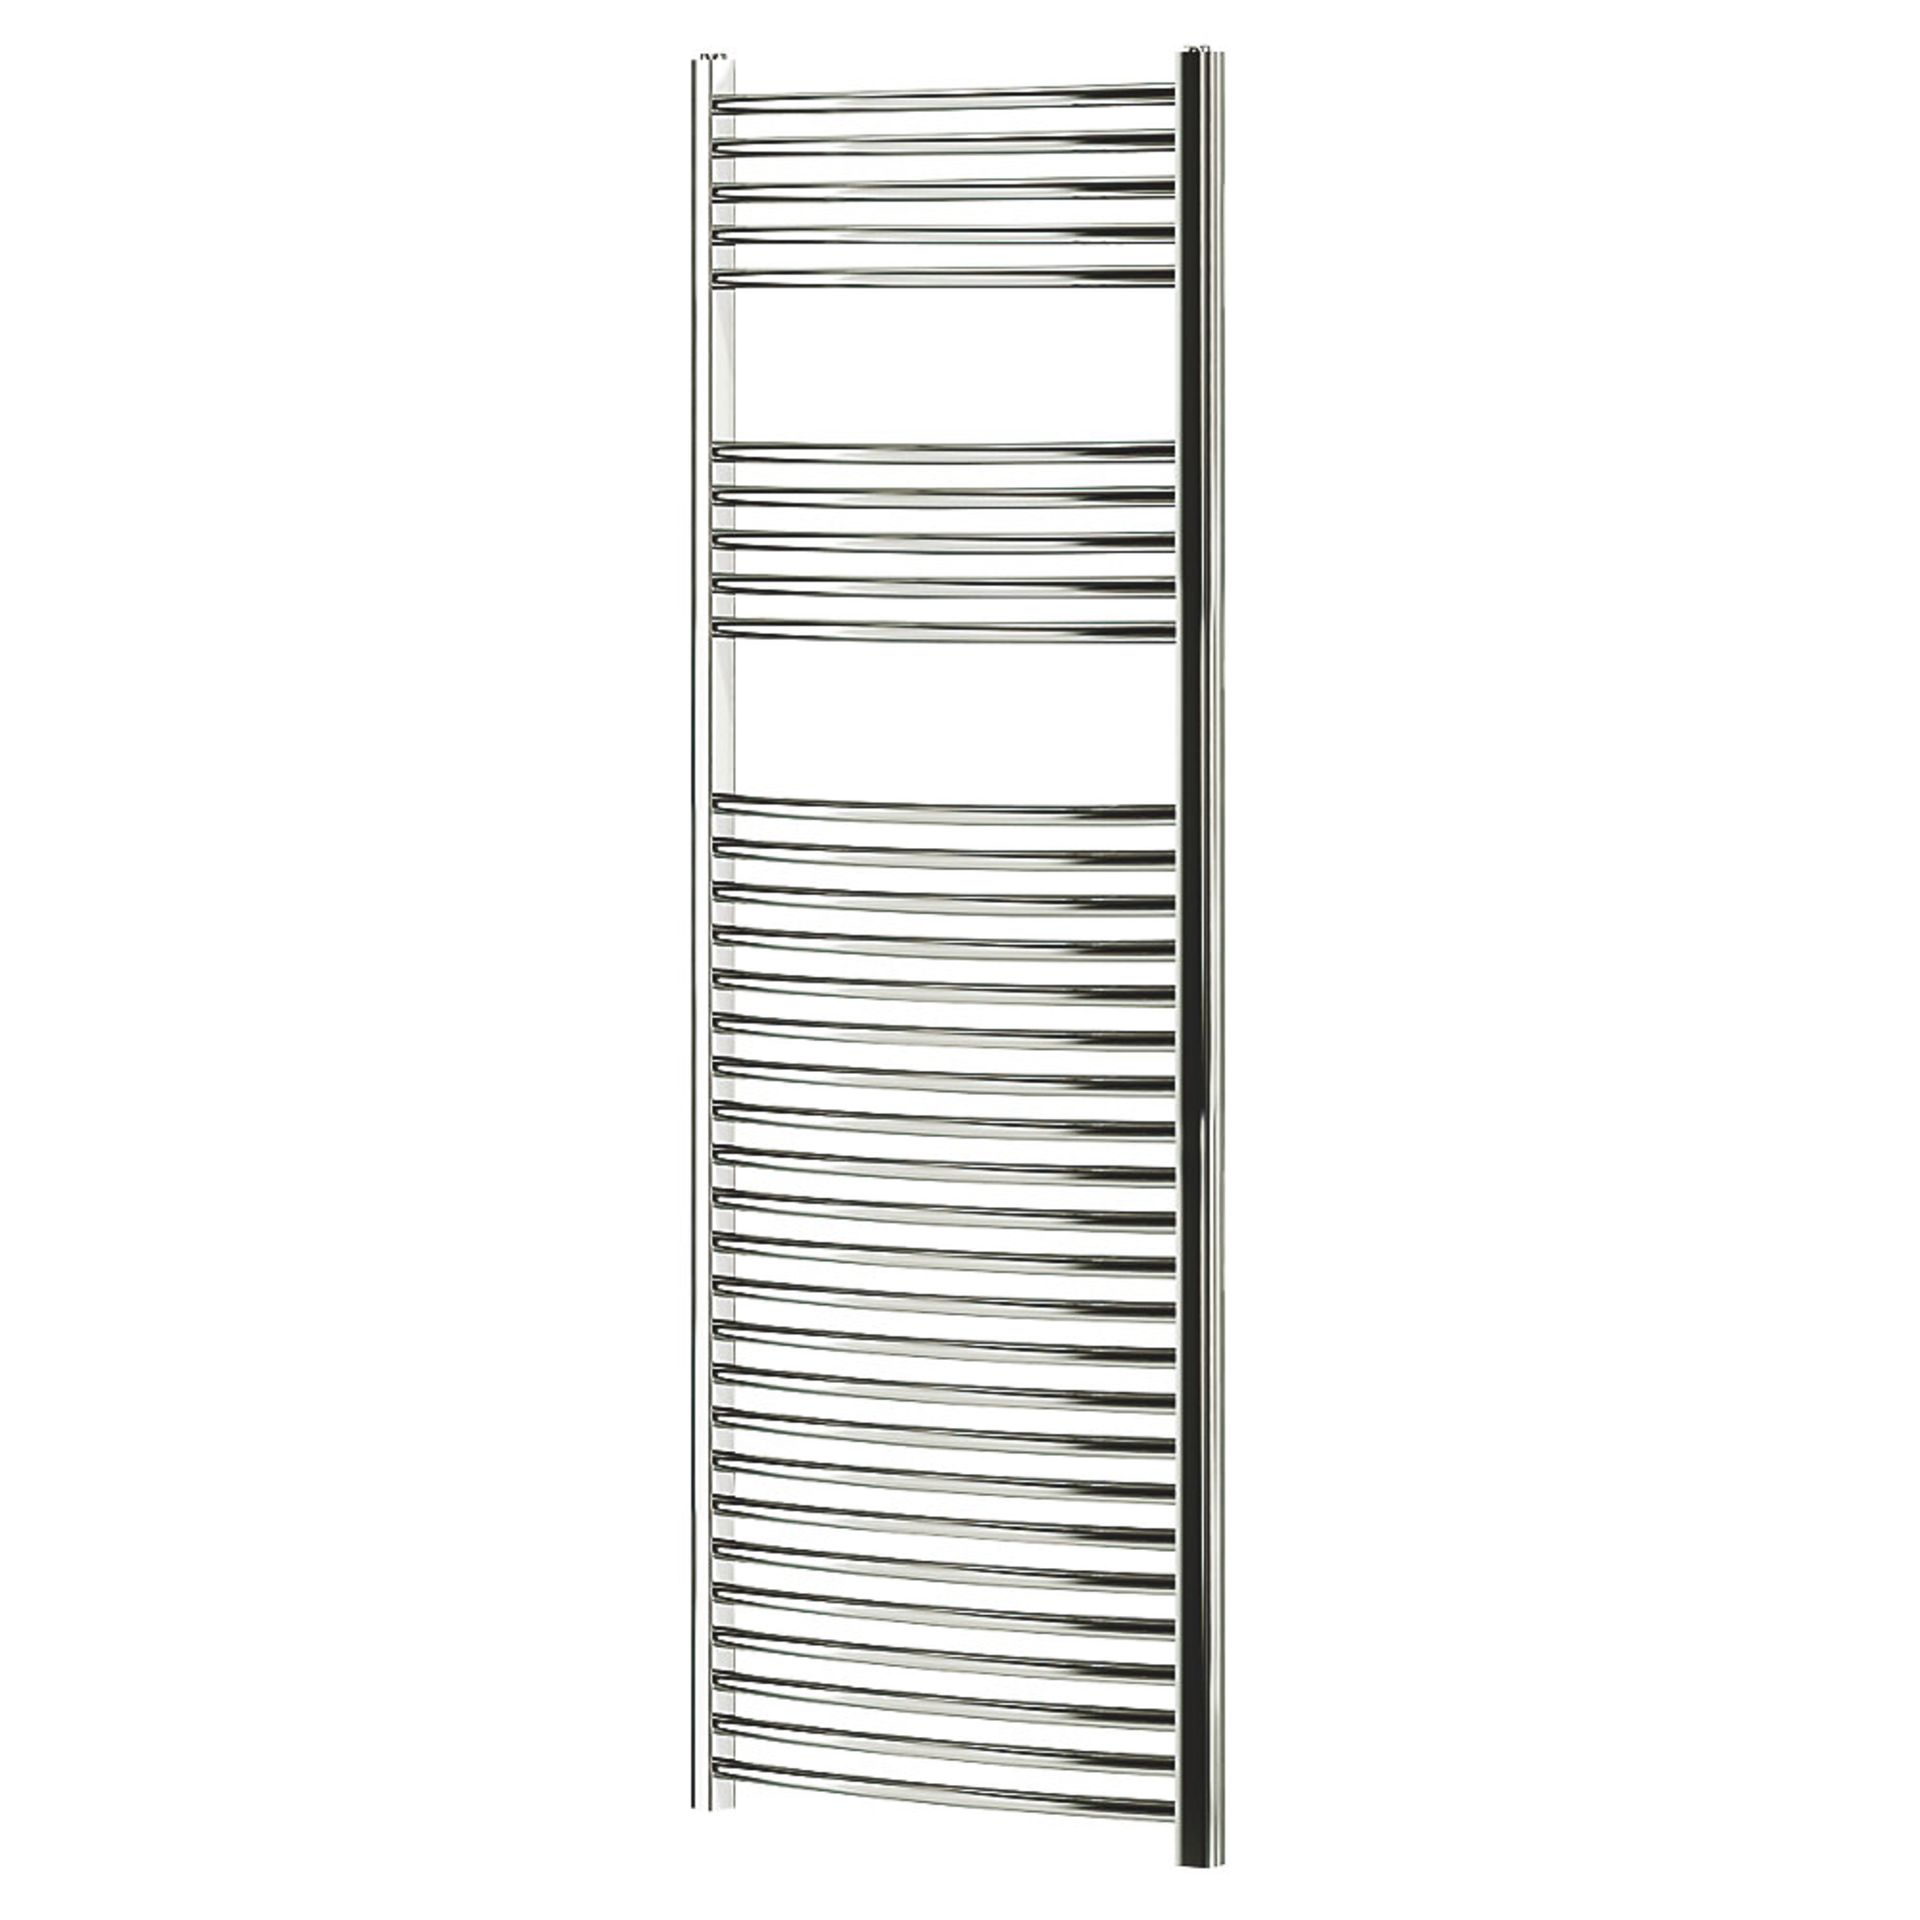 NEW (D361) 1600x600mm CURVED TOWEL RADIATOR 1600 X 600MM CHROME. Curved Chrome-Plated Steel C...